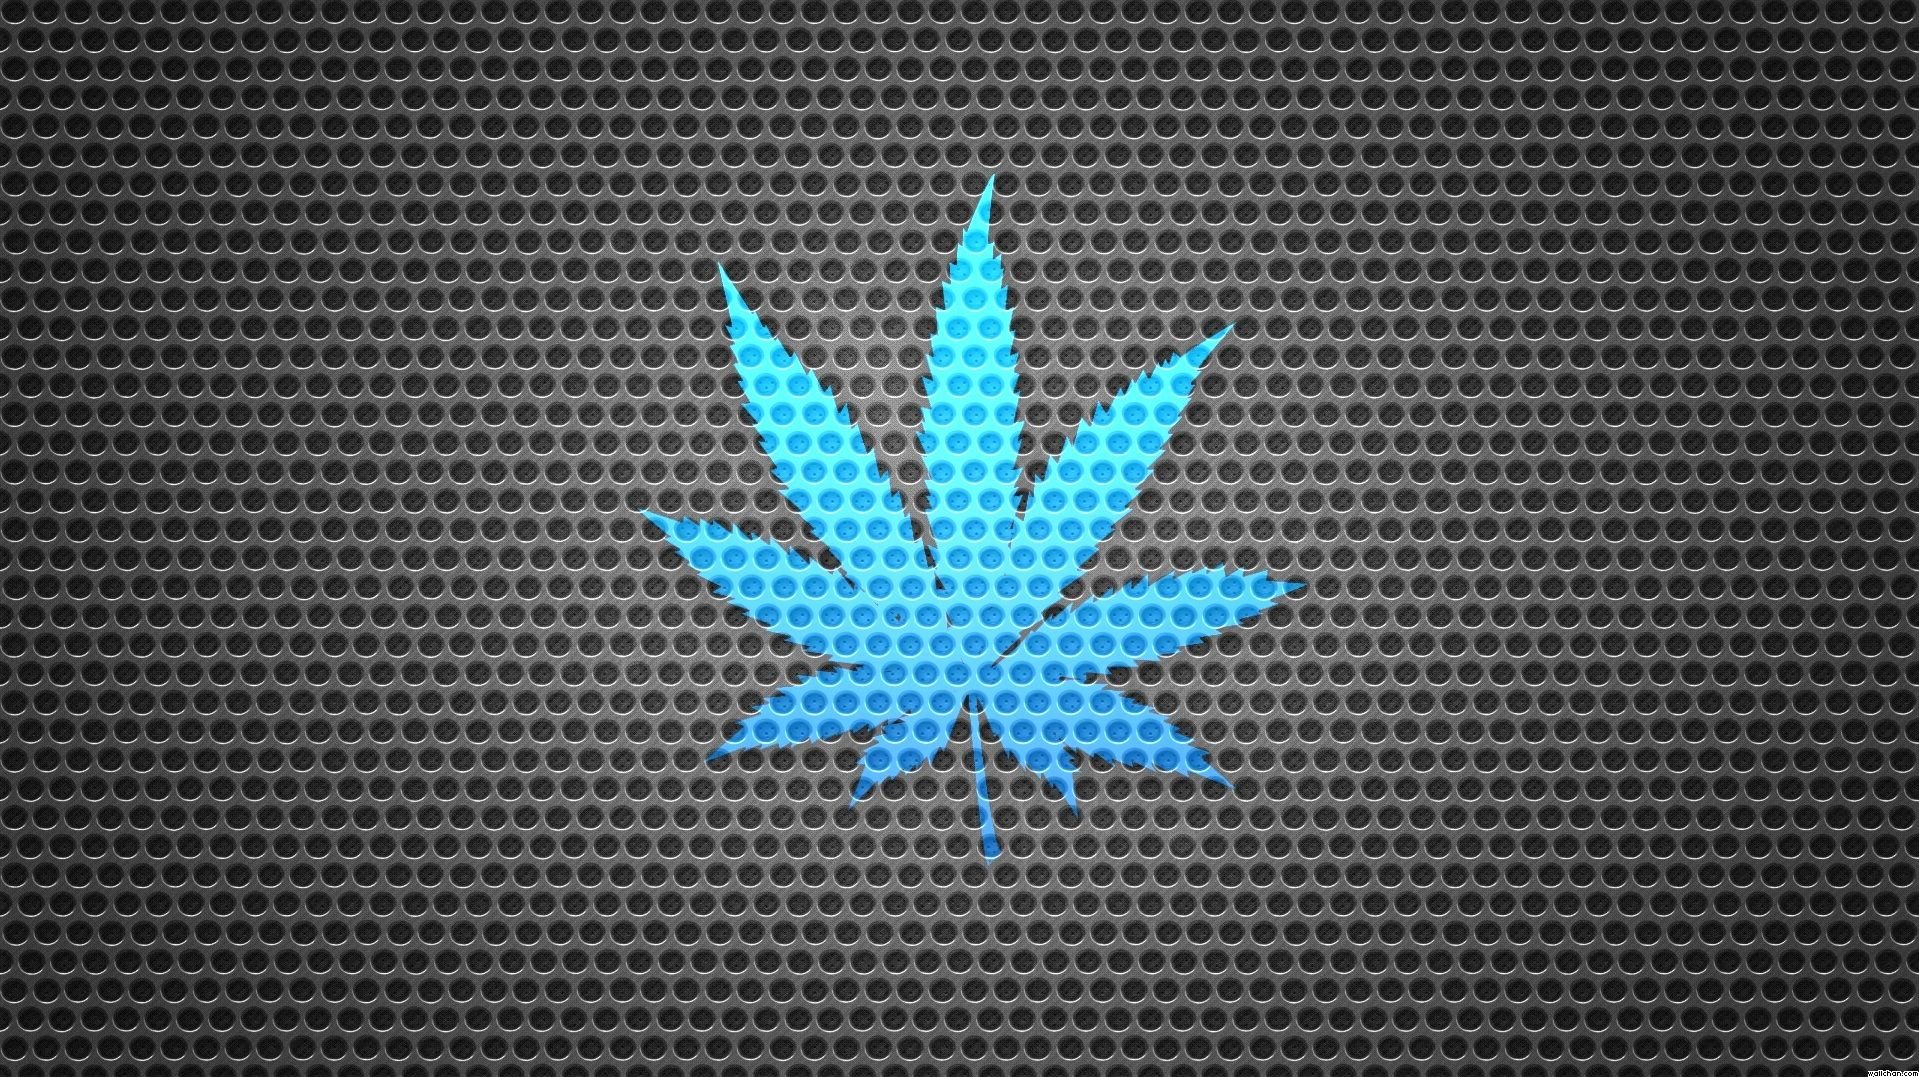 Blue Weed Wallpapers